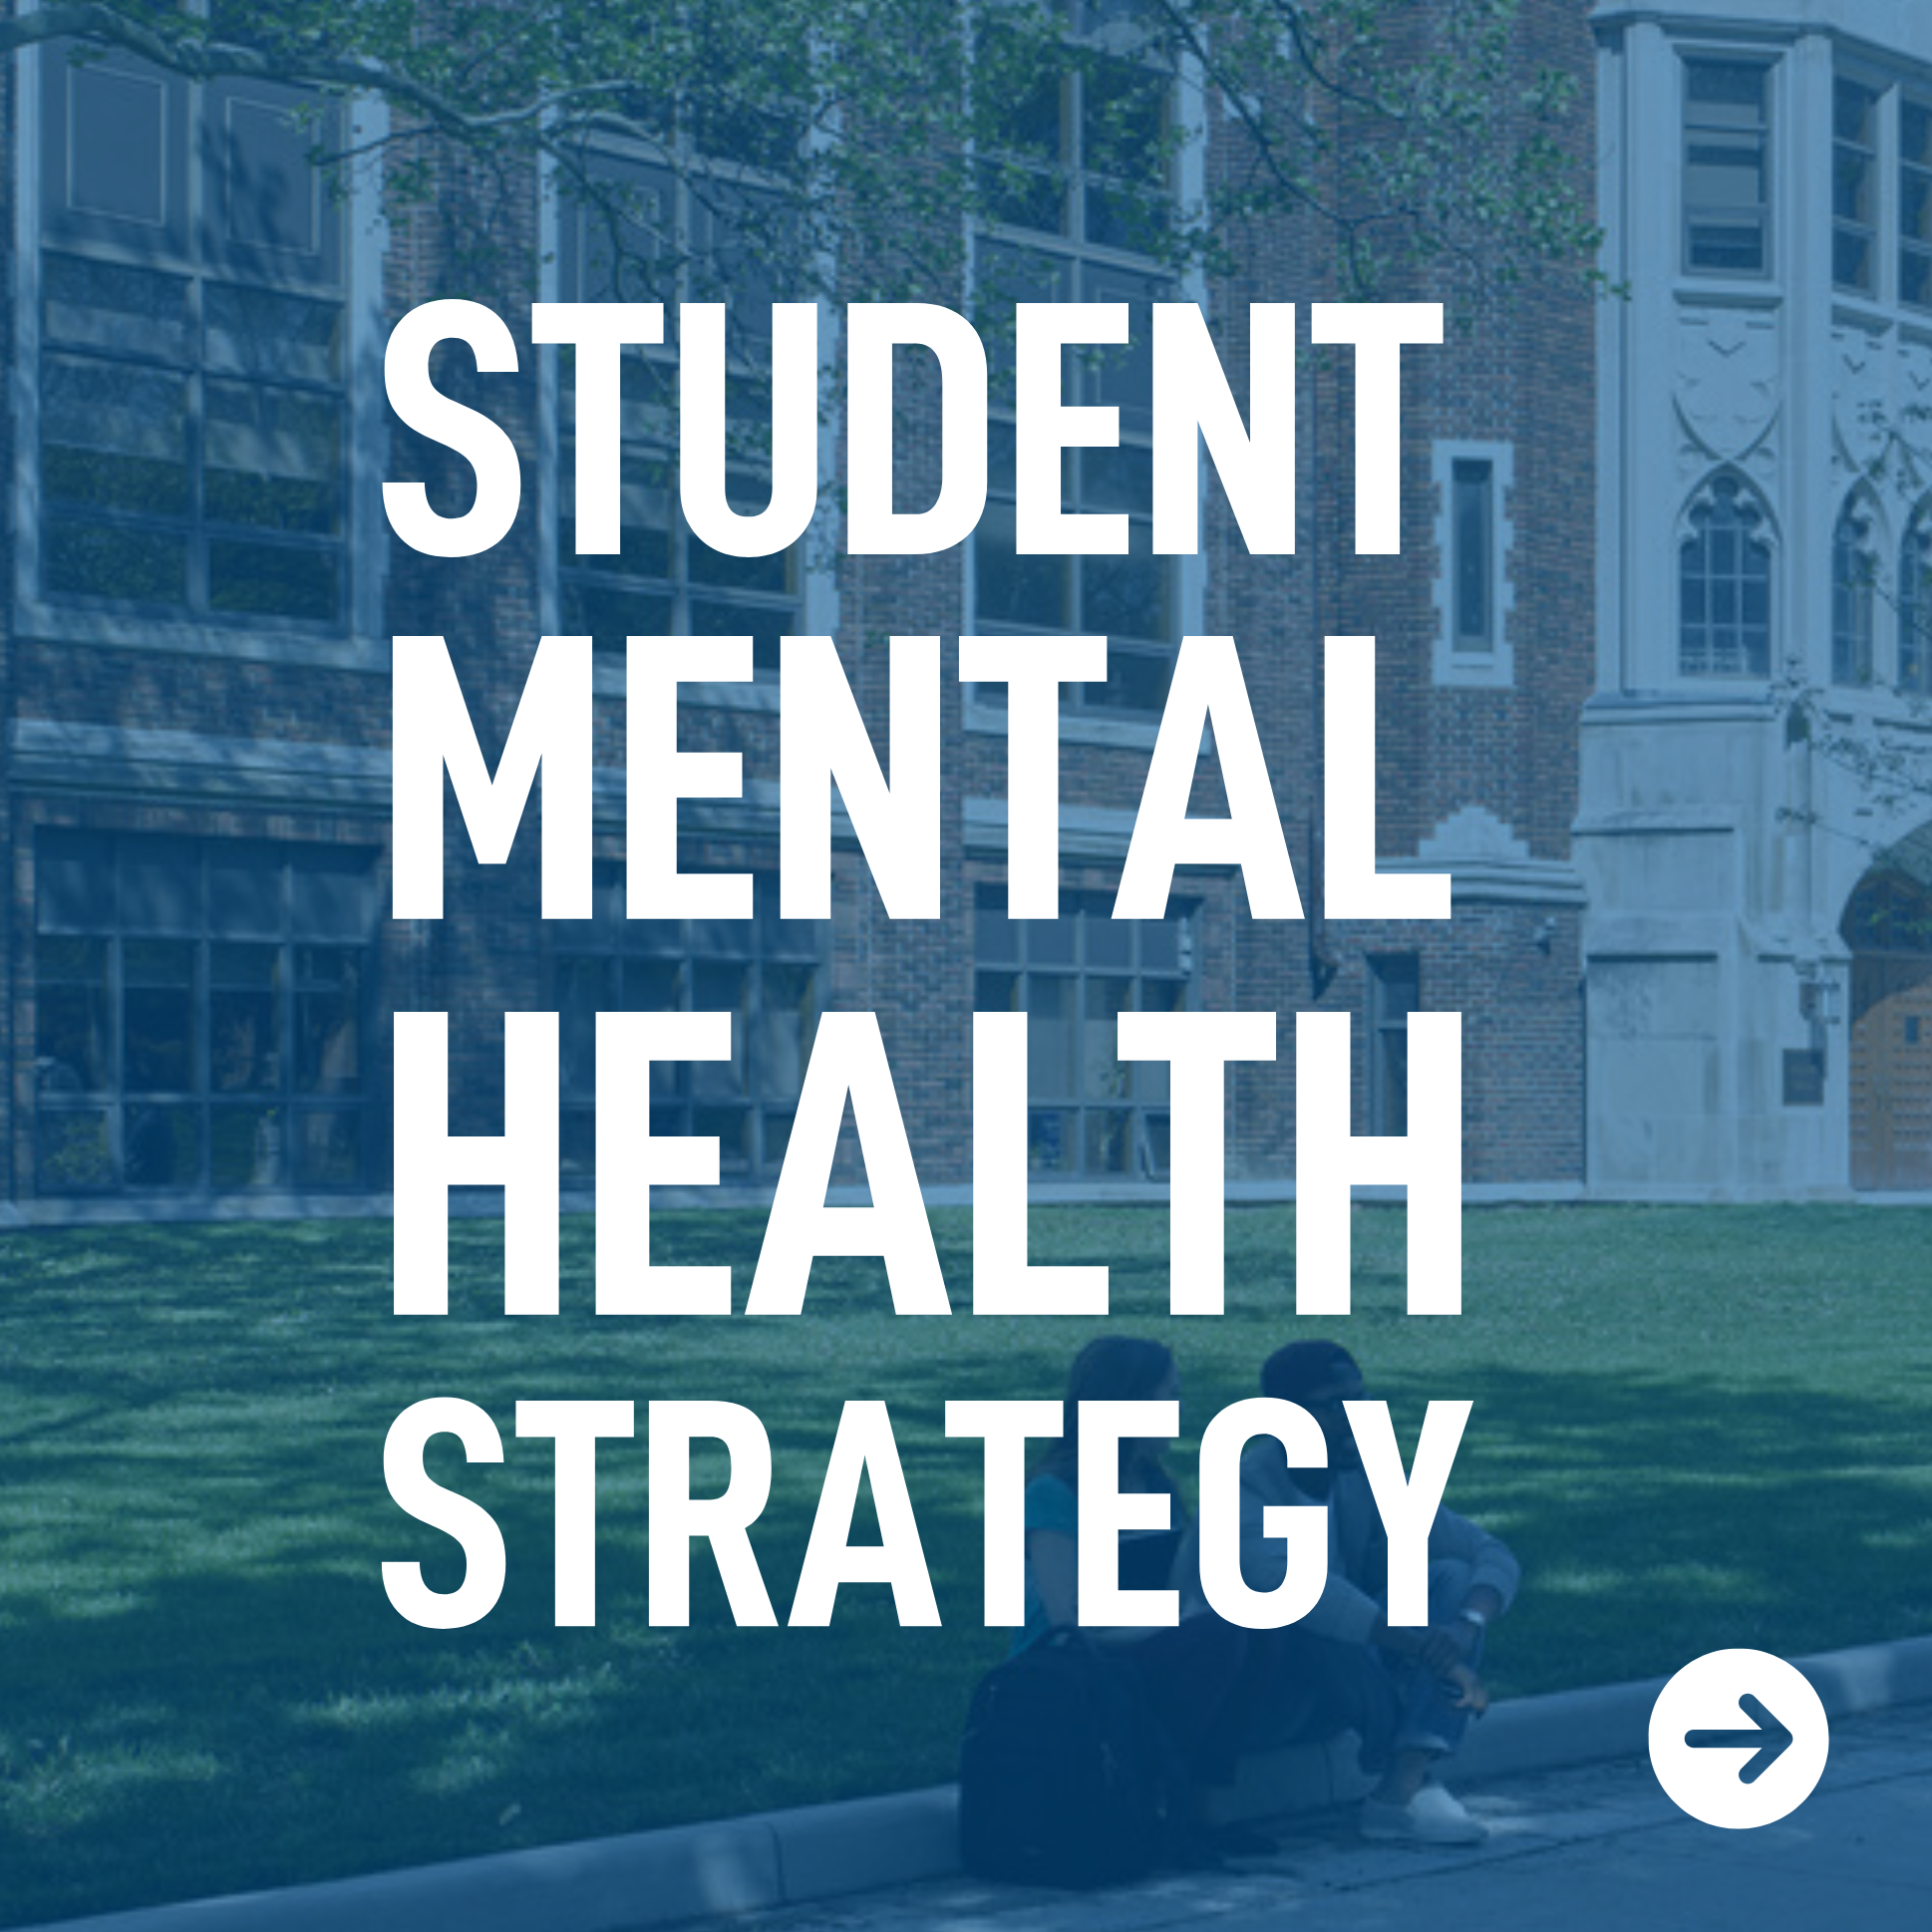 An image of Dillon Hall with the text "Student Mental Health Strategy" written on top of the image.